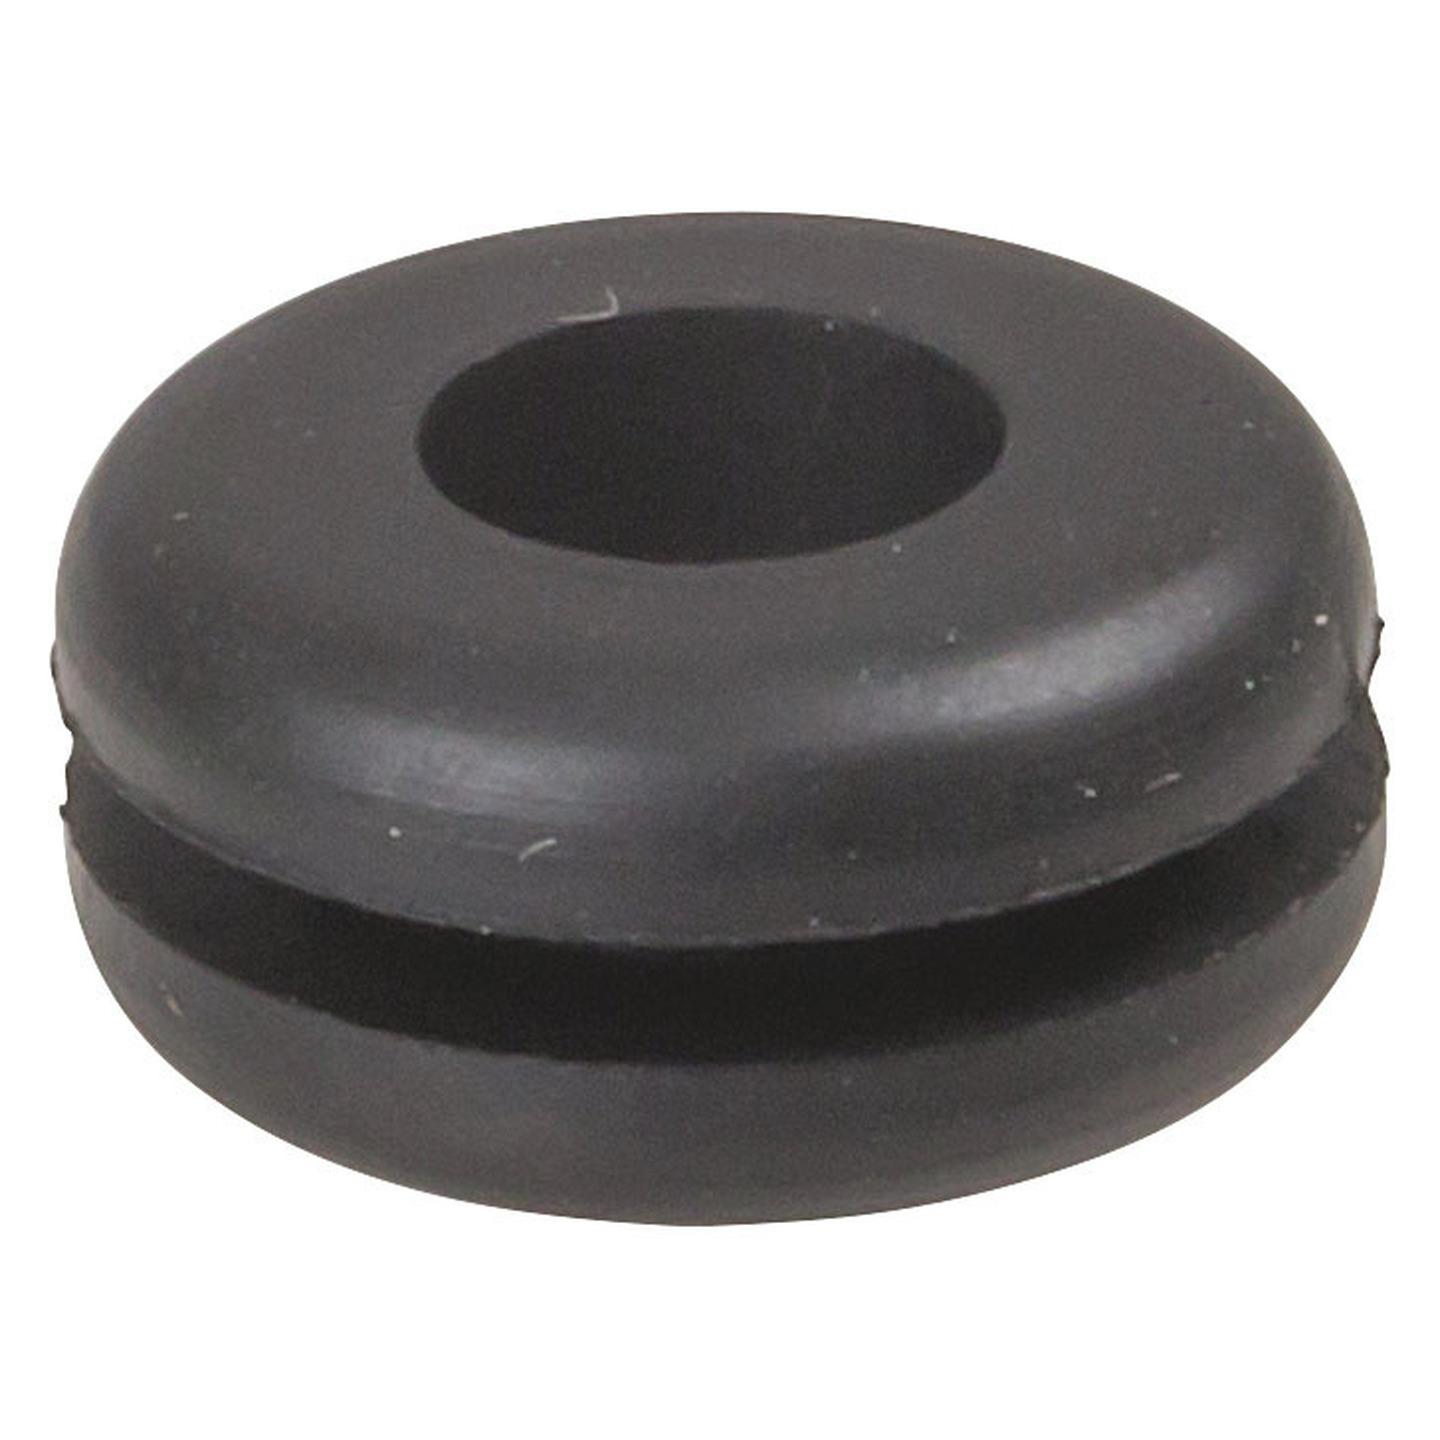 9.5mm Rubber Grommets - Cable Dia 6mm - Pack of 8